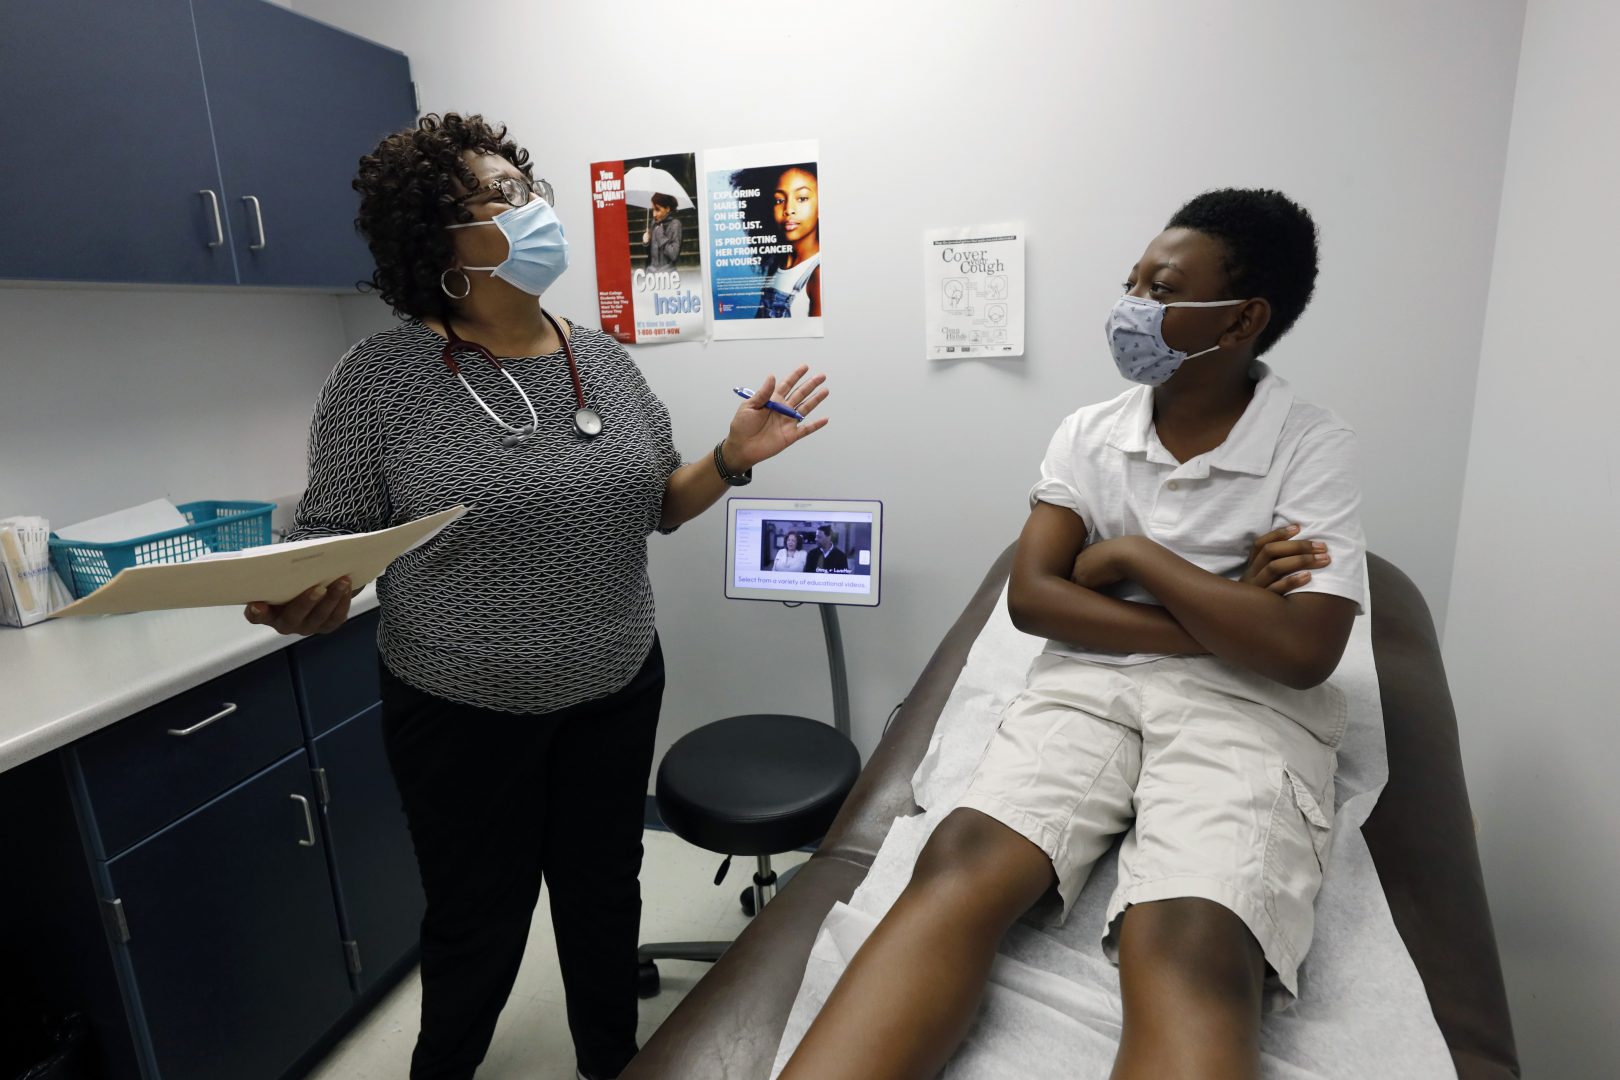 Jeremiah Young, 11, right, listens as Dr. Janice Bacon, a primary care physician, with Central Mississippi Health Services explains the necessity of receiving inoculations prior to attending school, Aug. 14, 2020, while at the Community Health Care Center on the Tougaloo College campus in Tougaloo, Miss. As a Black primary care physician, Bacon has created a safe space for her Black patients during the coronavirus pandemic.